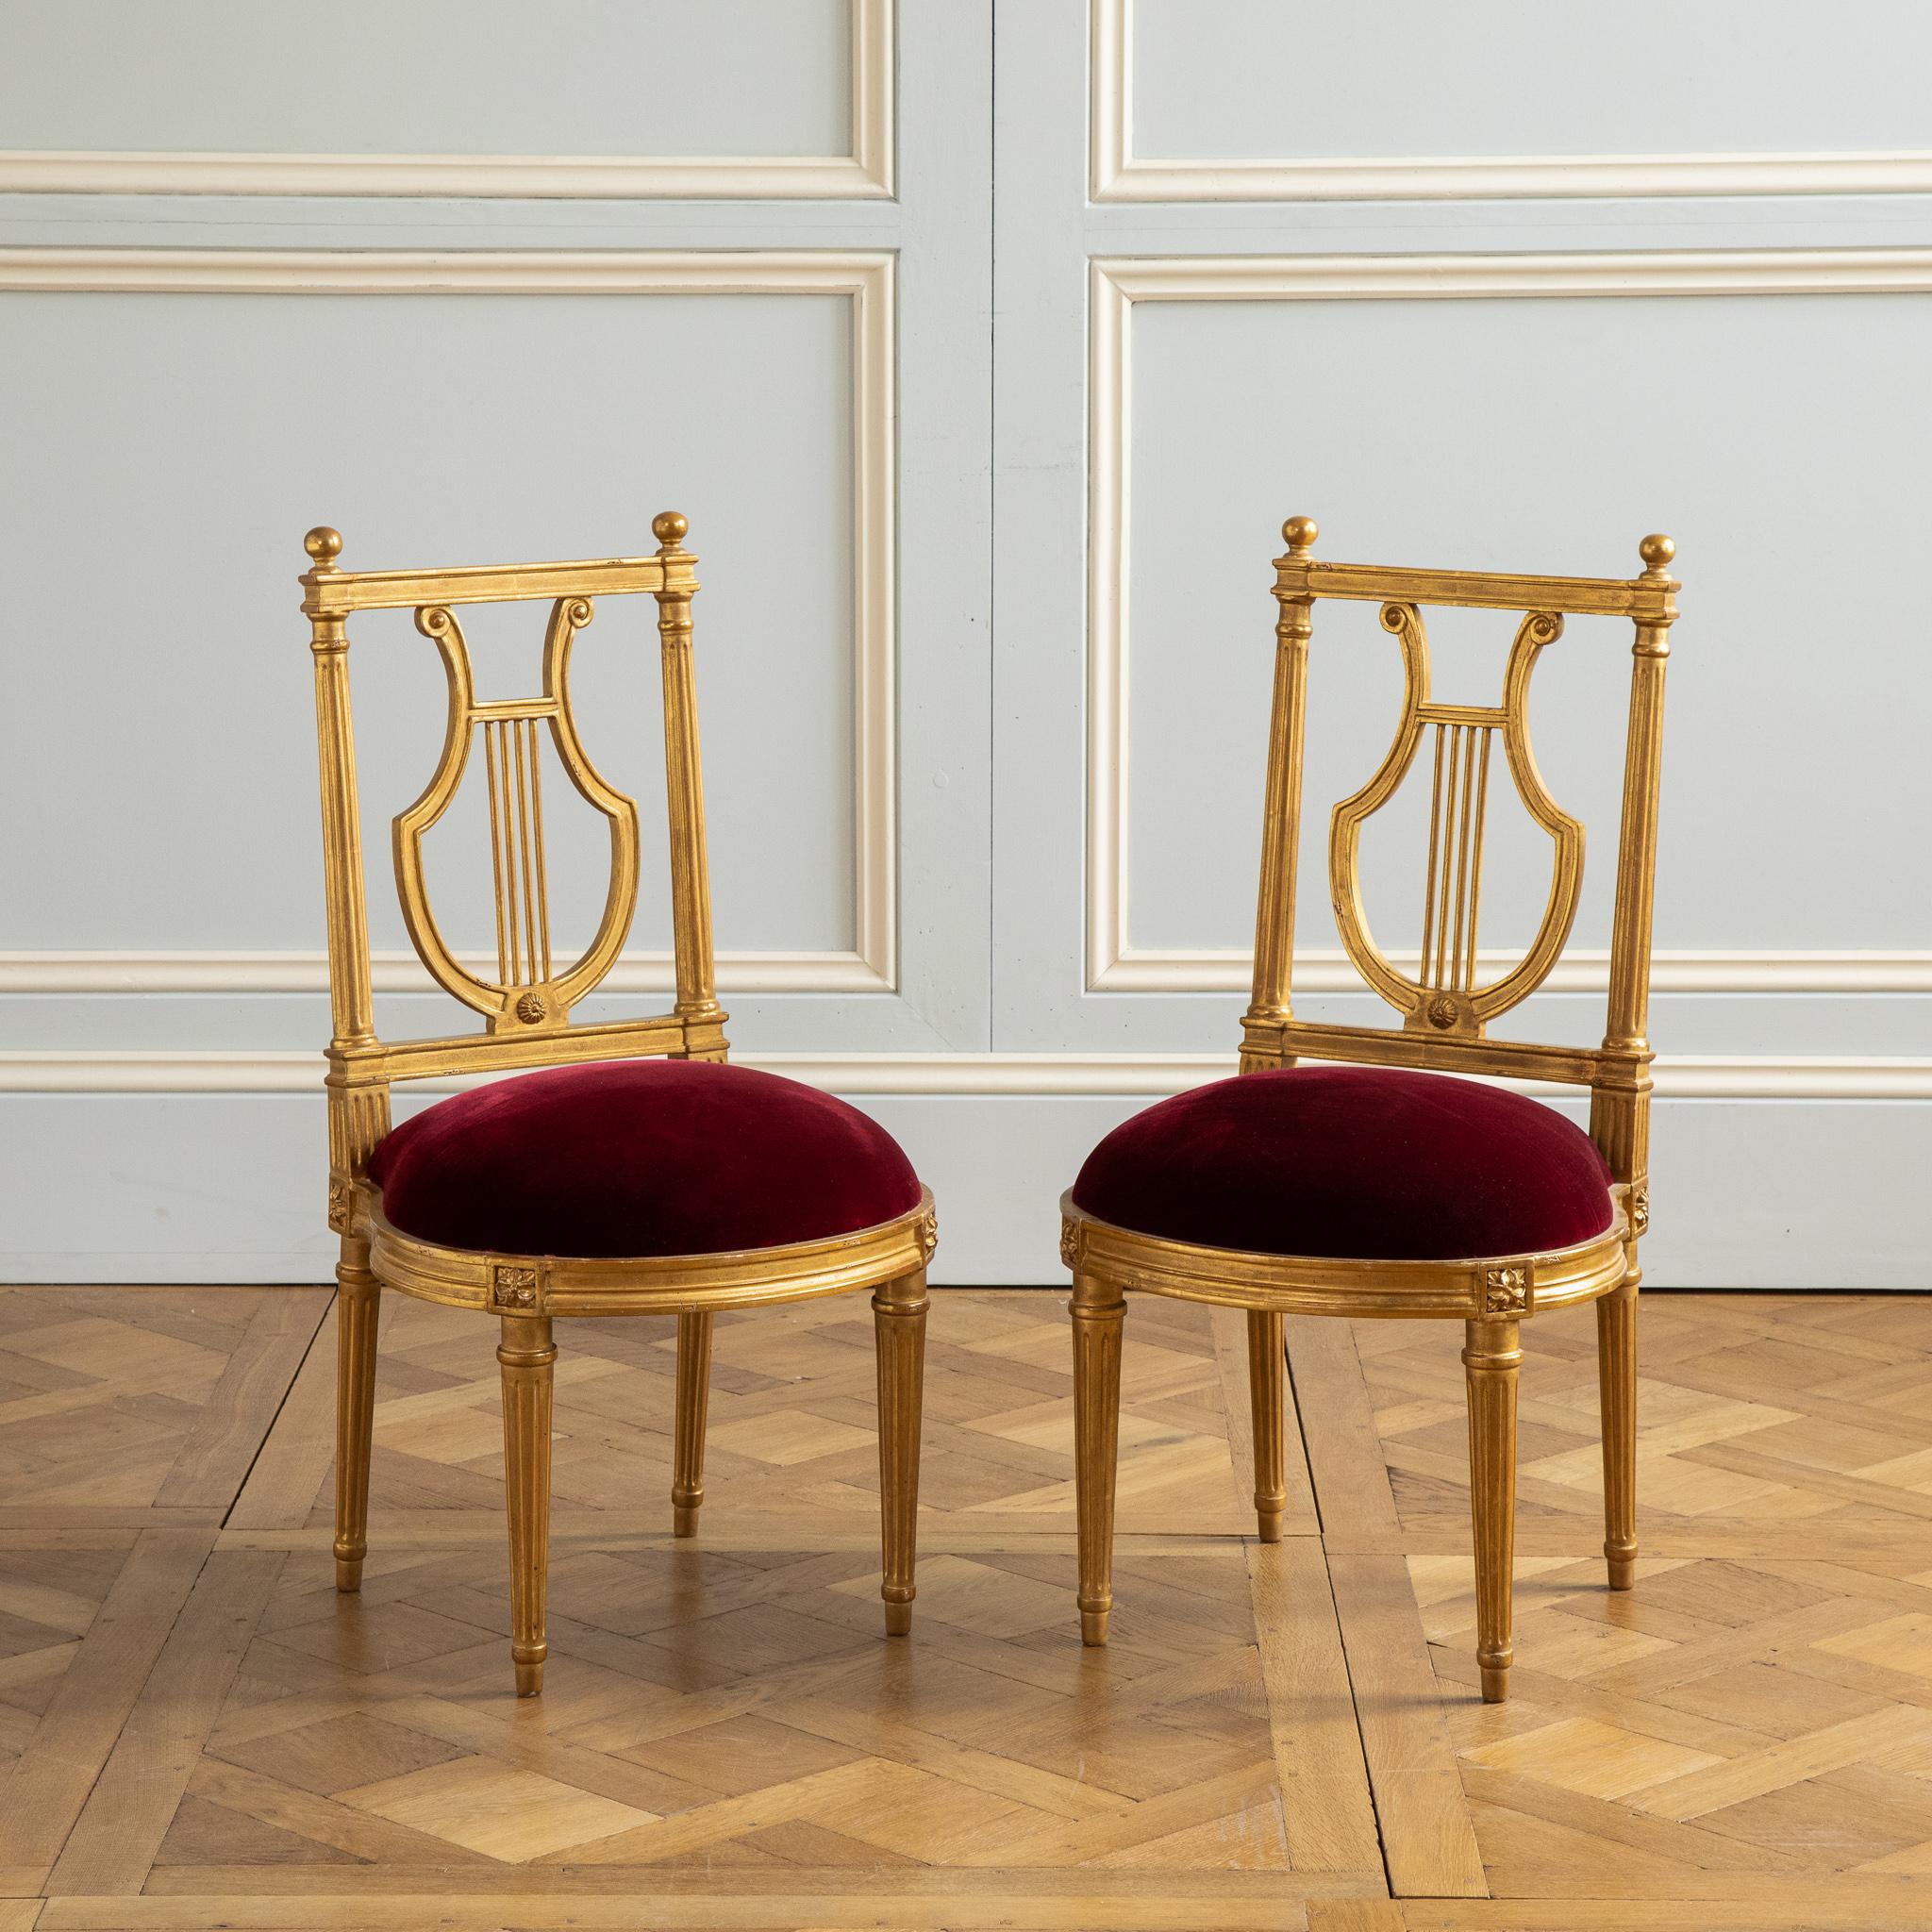 Louis XVI Gilded Lyre Chairs with Deep Red Velvet Inspired by Jacob For Sale 1